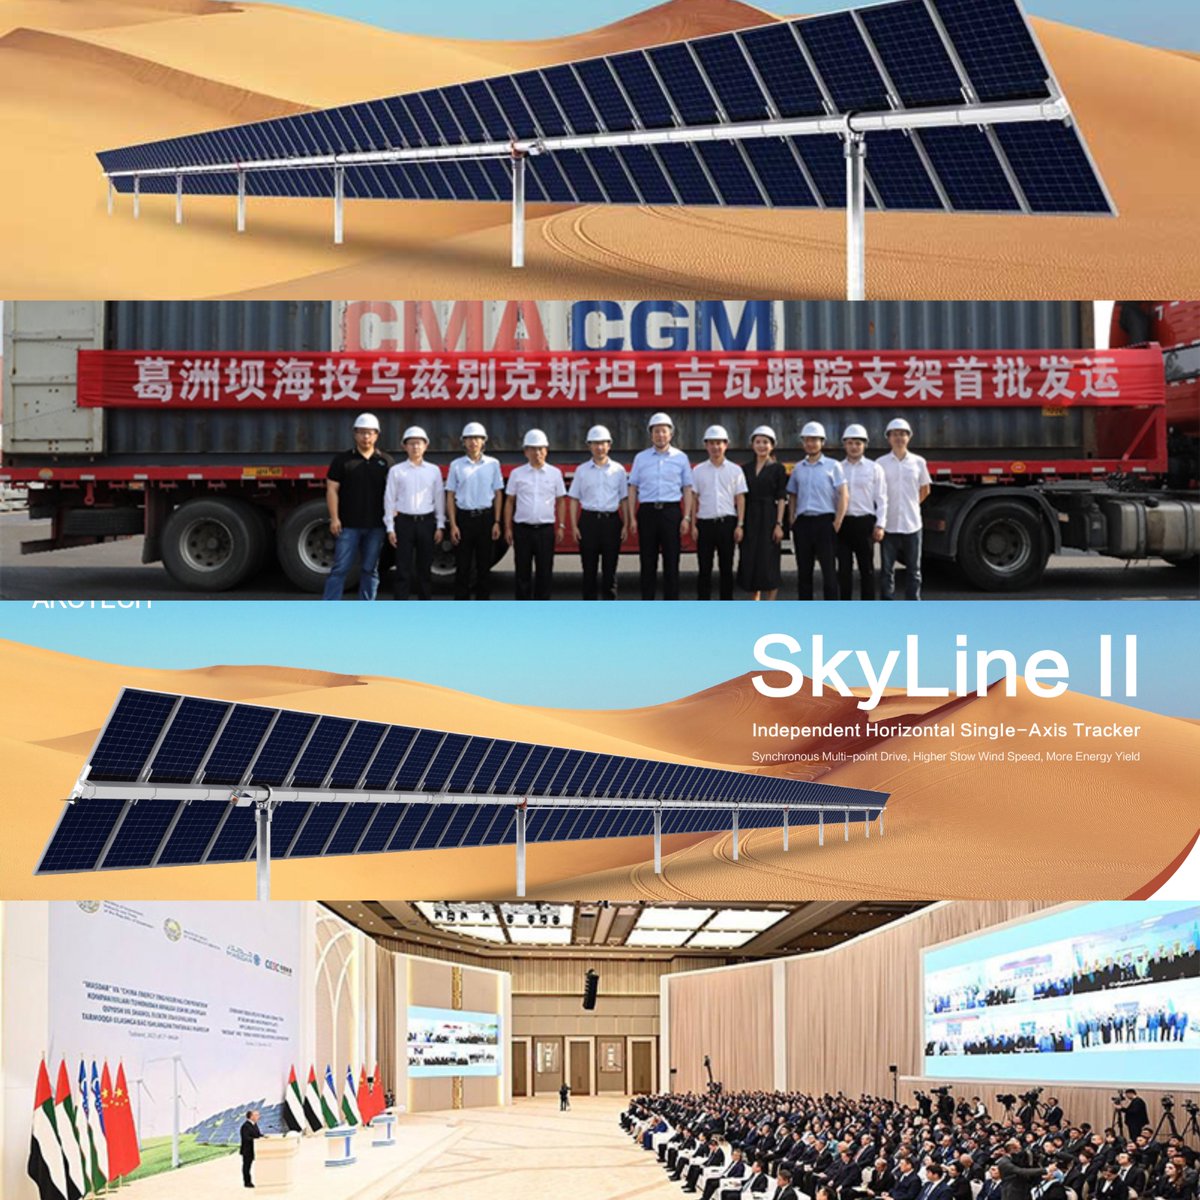 #Arctechyearendreview #Arctech achieved a lot in APAC:
In Apr.,312MW #SkyLineII project in #Azerbaijan
In Aug.,1GW #SkyWings project in #Uzbekistan
In Sept., 240MW and 500MW #SkyLineII projects in #Uzbekistan. 
12.27, #SkyWings enabled on-time connection of 400MW of 1GW #project.